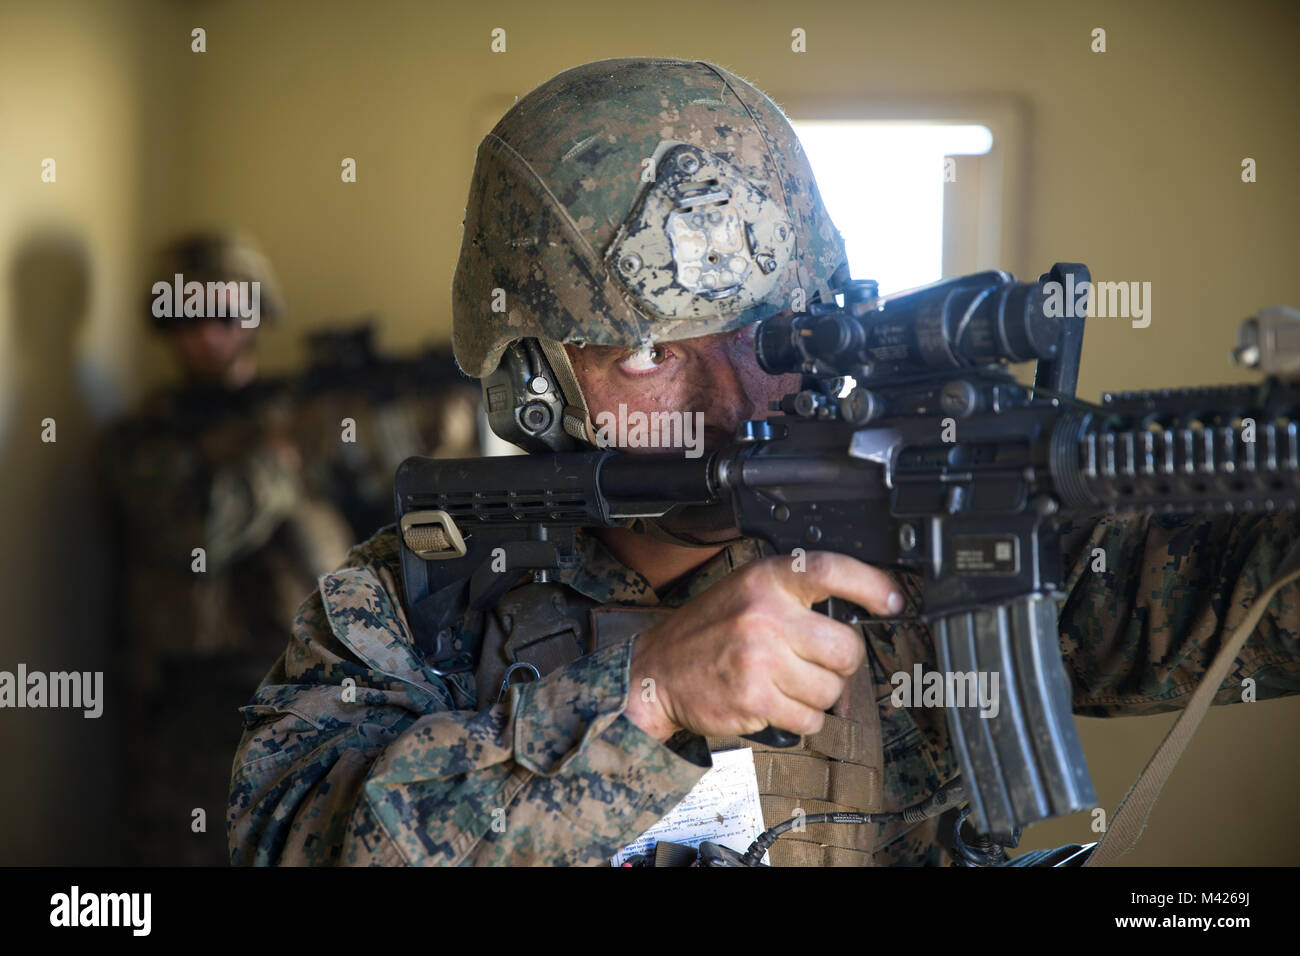 A U.S. Marine with Kilo Company, Battalion Landing Team (BLT), 3rd Battalion, 1st Marine Regiment sights in during an assault exercise on Camp Pendleton, California, Jan. 31, 2018. BLT 3/1 is refining tactics, techniques, and procedures applicable to raid operations in order to enhance their ability to conduct expeditionary operations while deployed. (U.S. Marine Corps photo by Cpl. Danny Gonzalez) Stock Photo